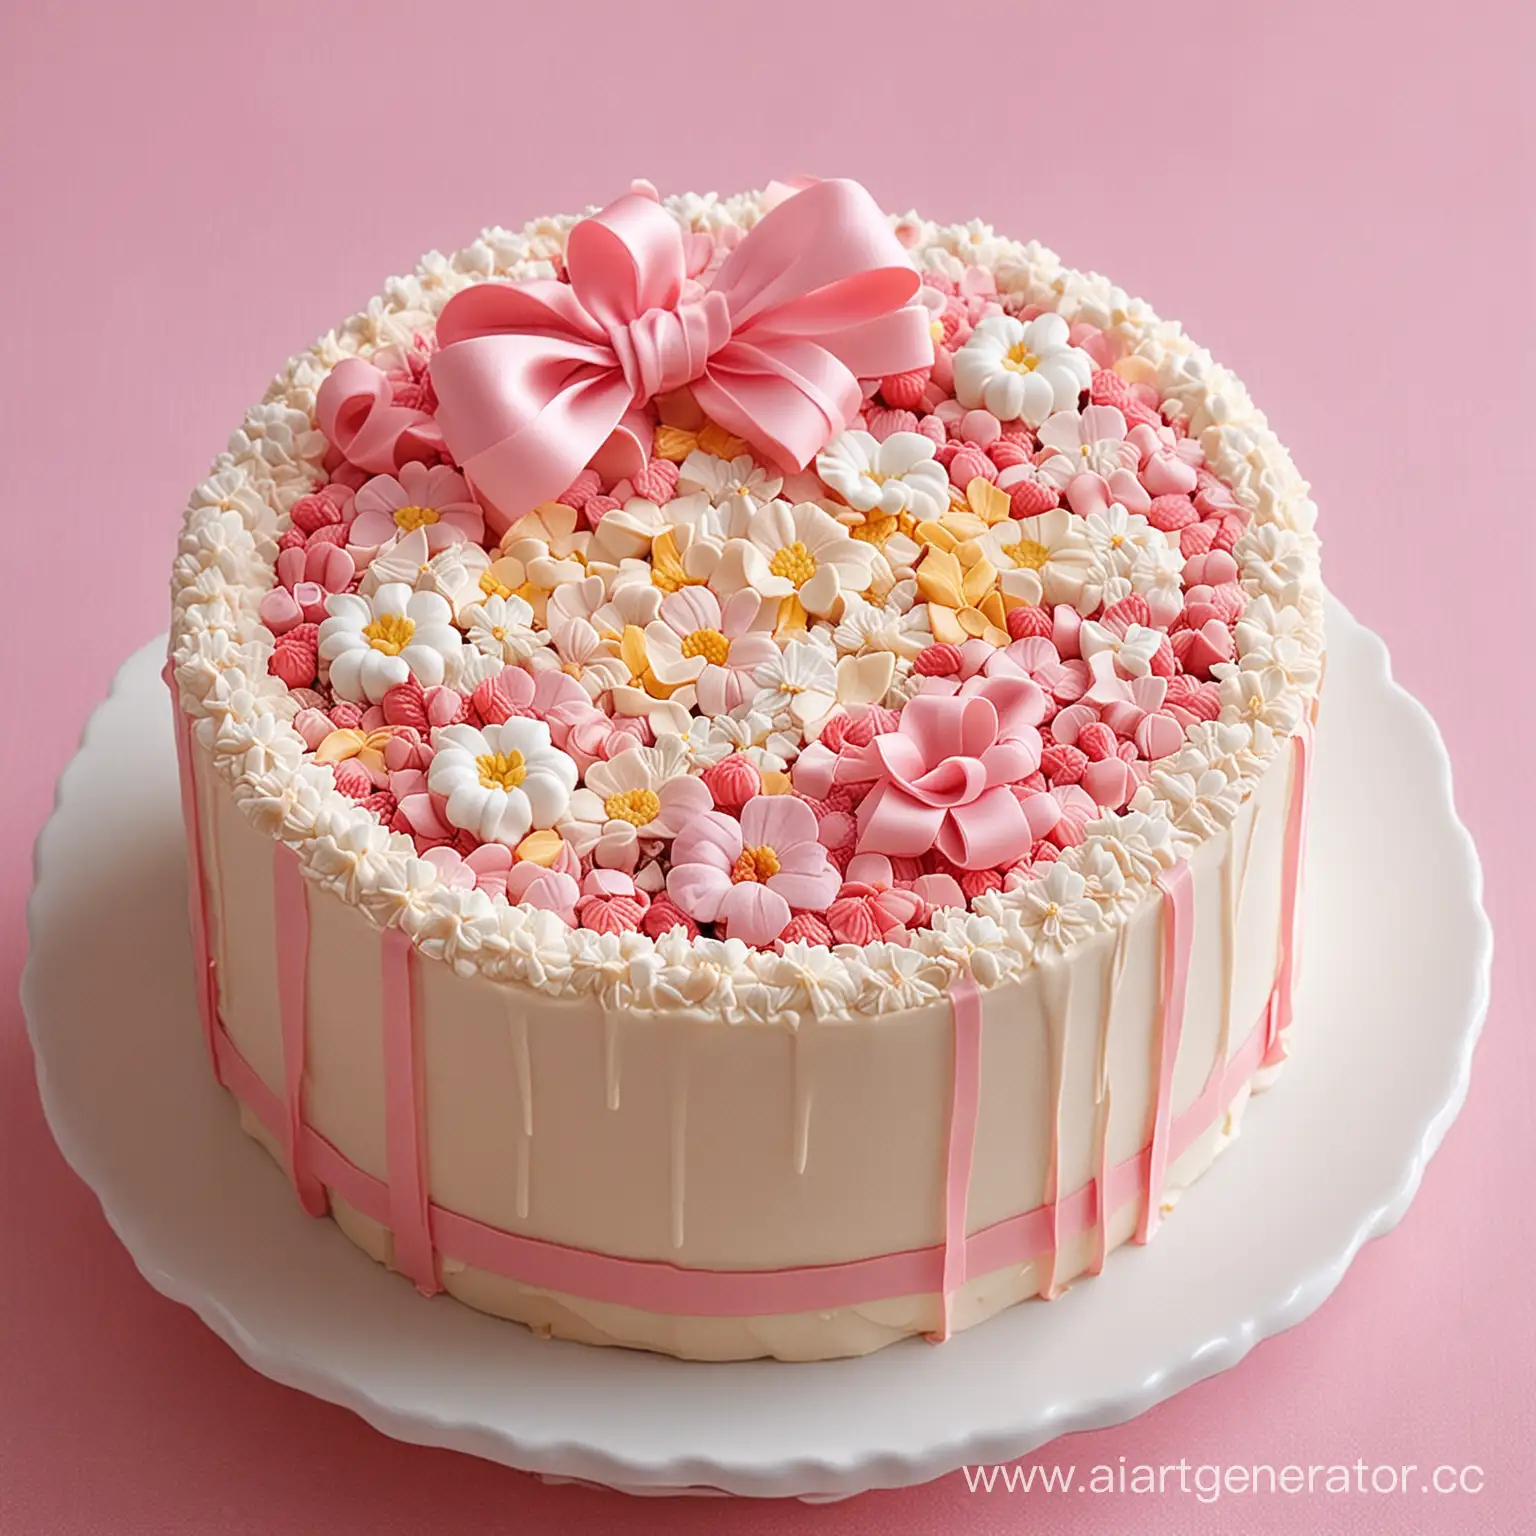 Elegant-White-Bento-Cake-Adorned-with-Delicate-Pink-Ribbons